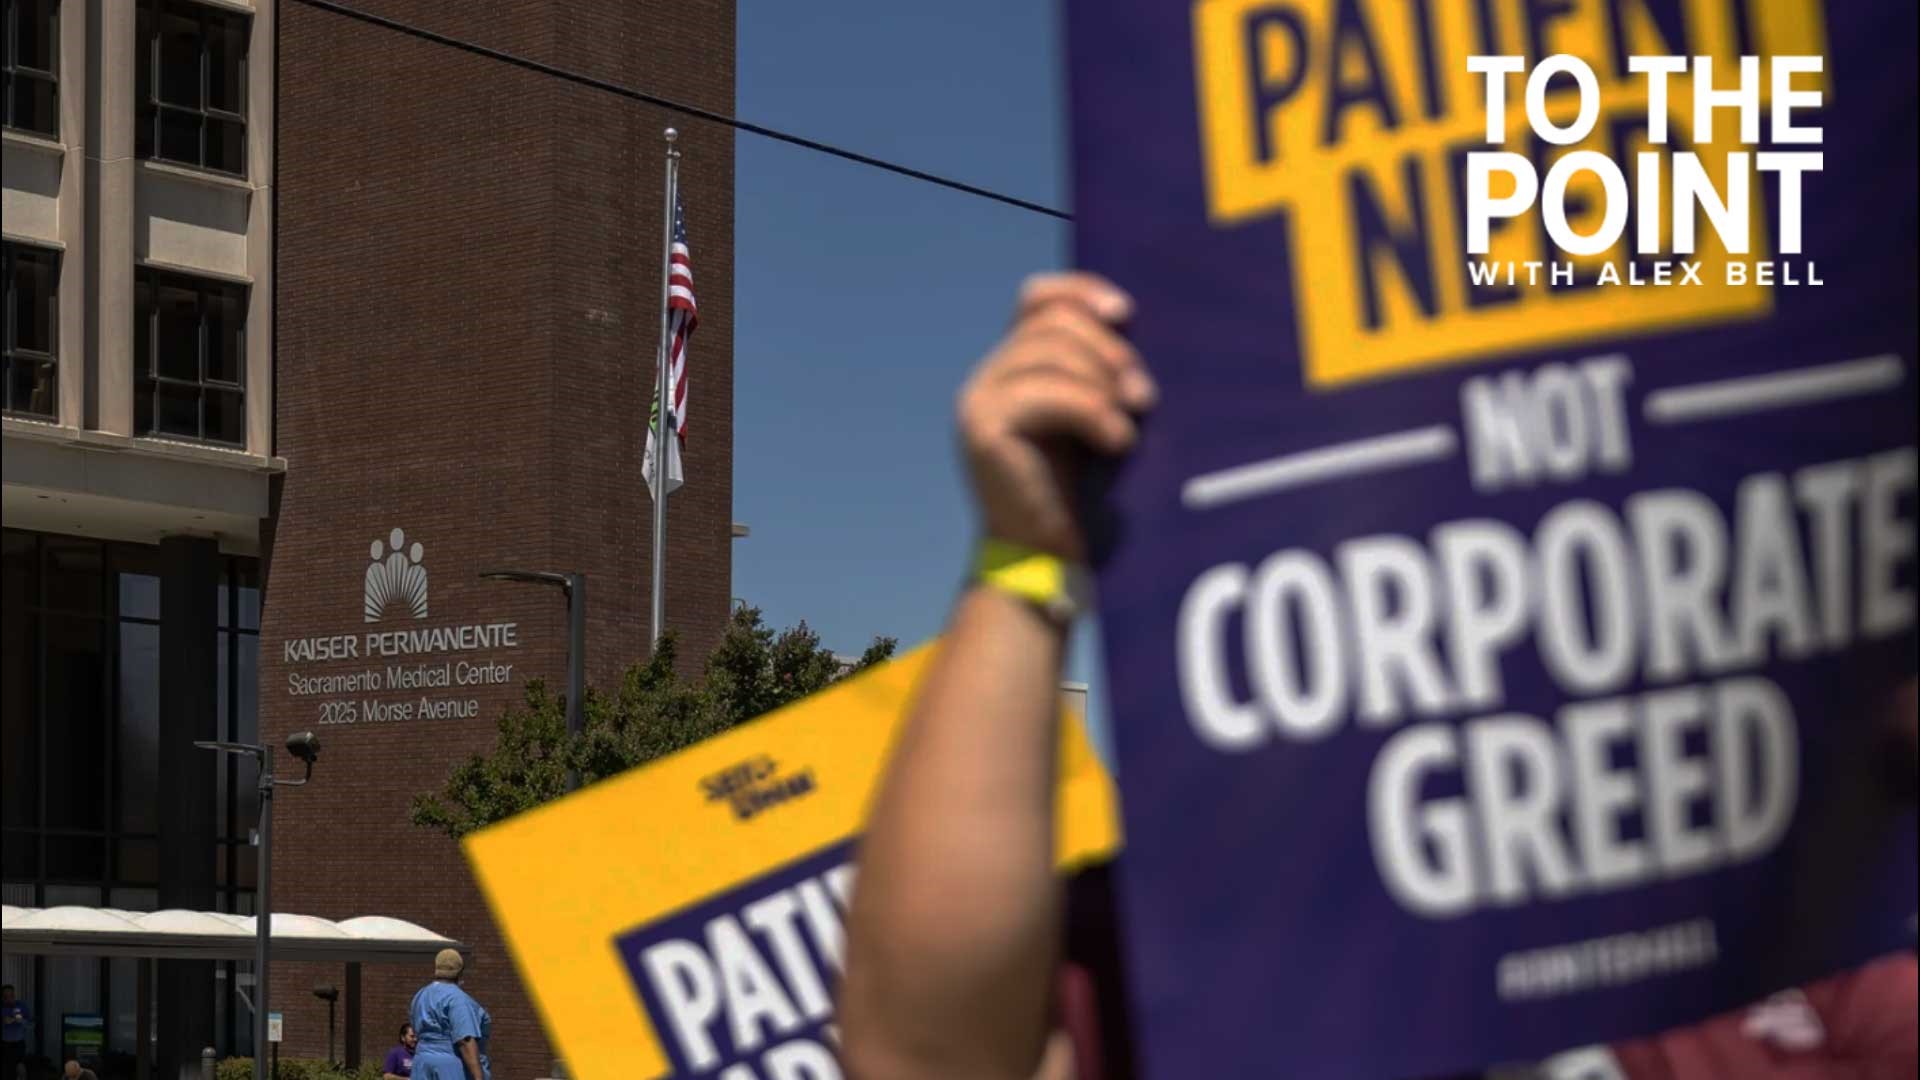 Patients voice health concerns ahead of possible Kaiser strike